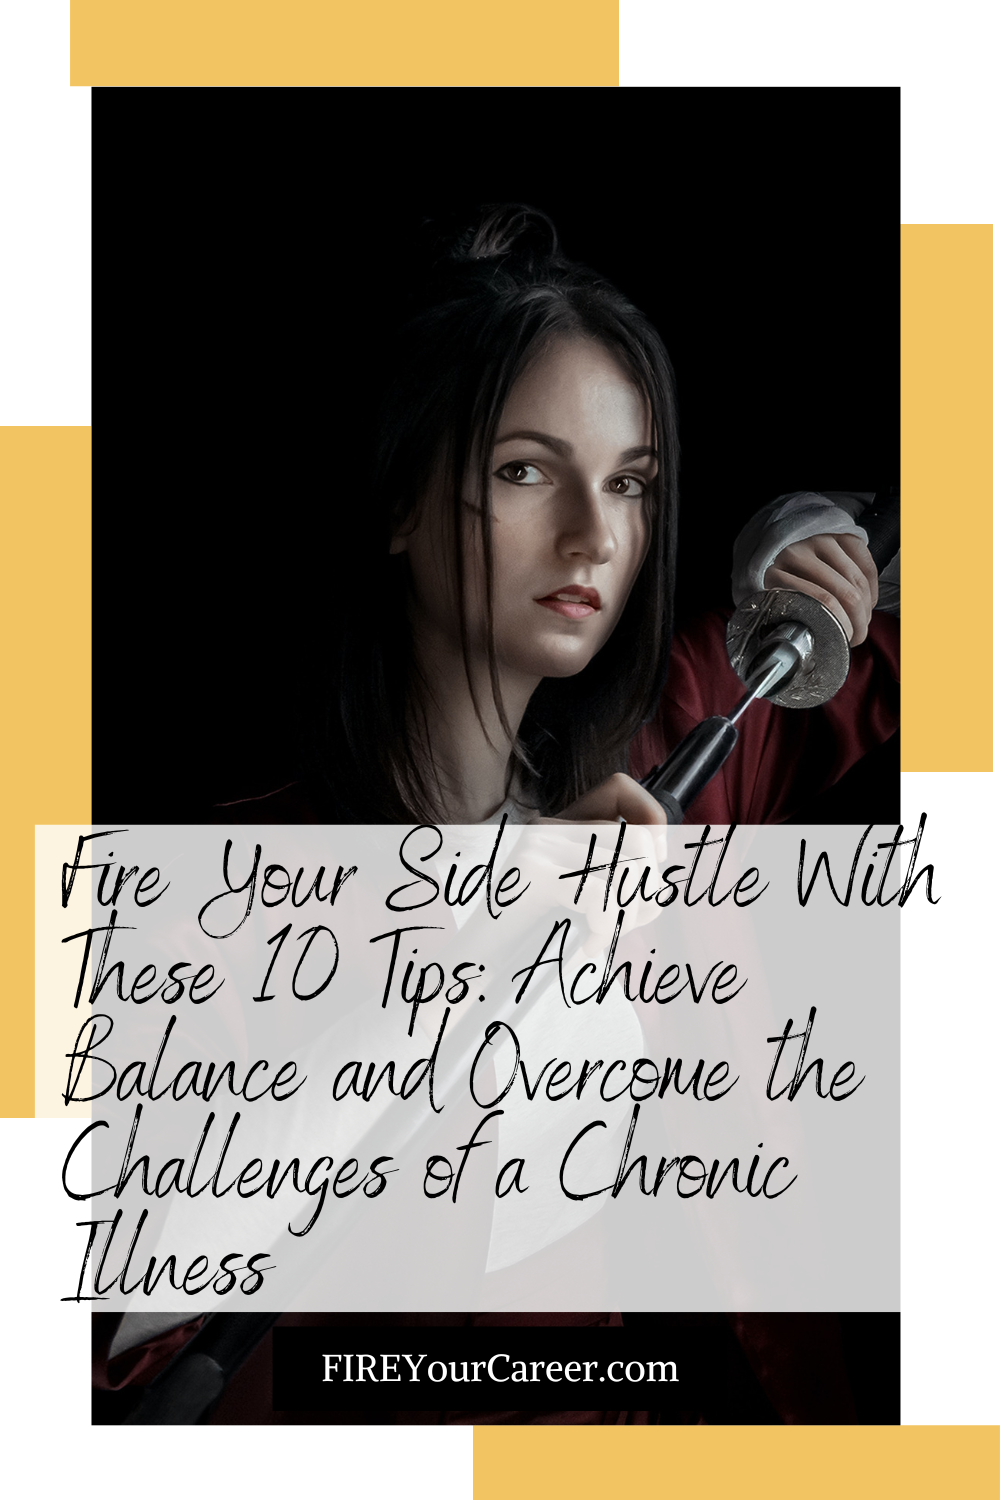 Fire Your Side Hustle With These 10 Tips Achieve Balance and Overcome Chronic Illness Challenge Pinterest